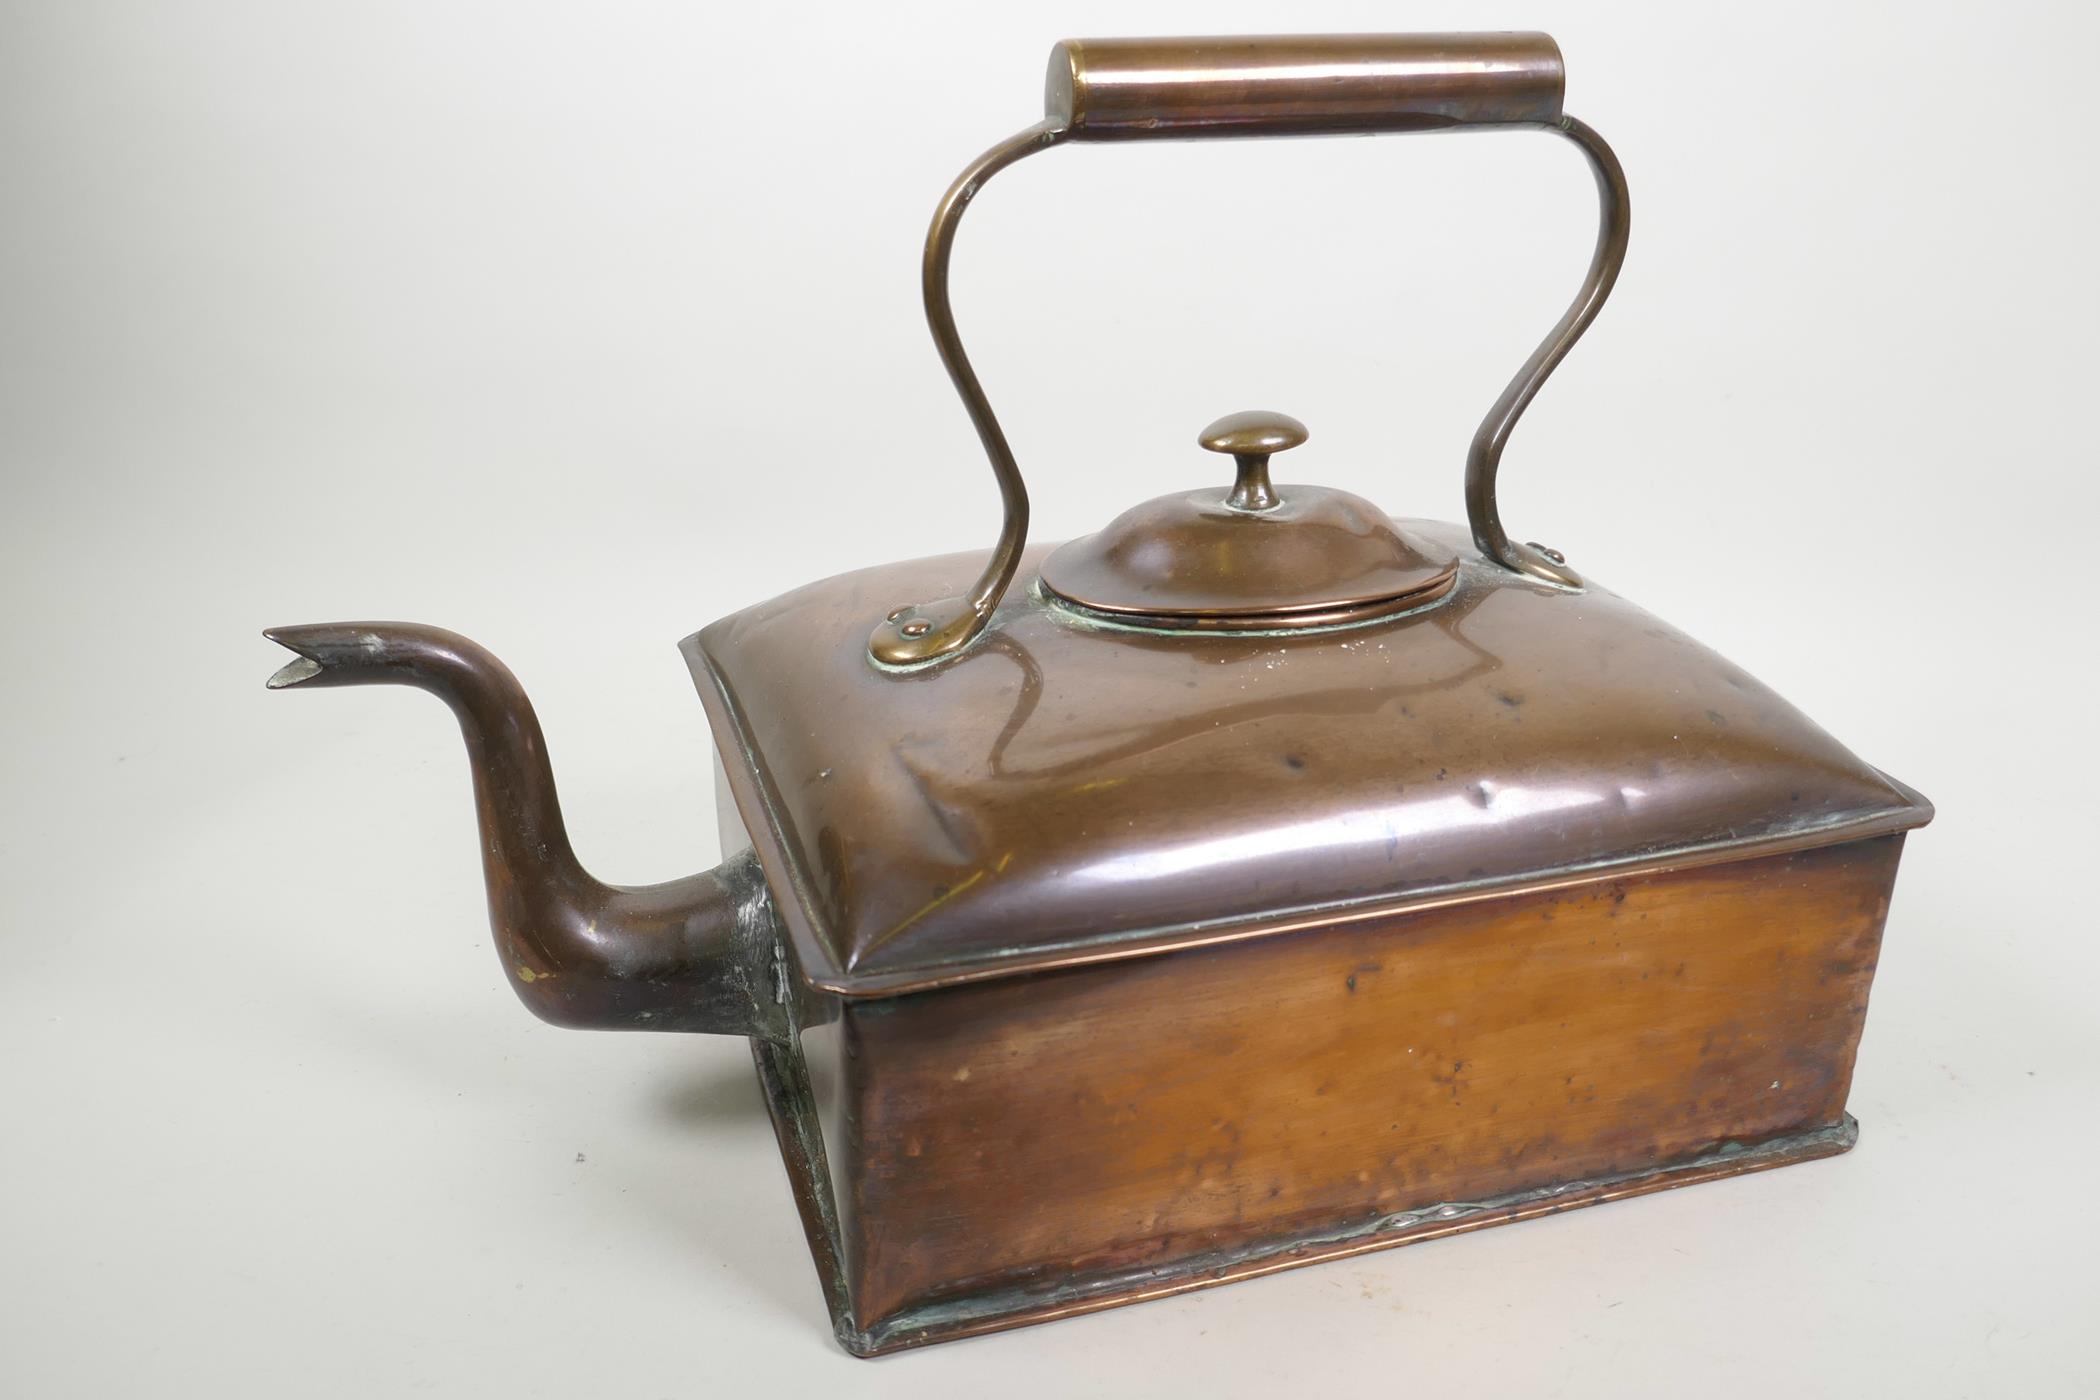 A C19th large rectangular copper ship's kettle, 16" long, 11" high - Image 3 of 3